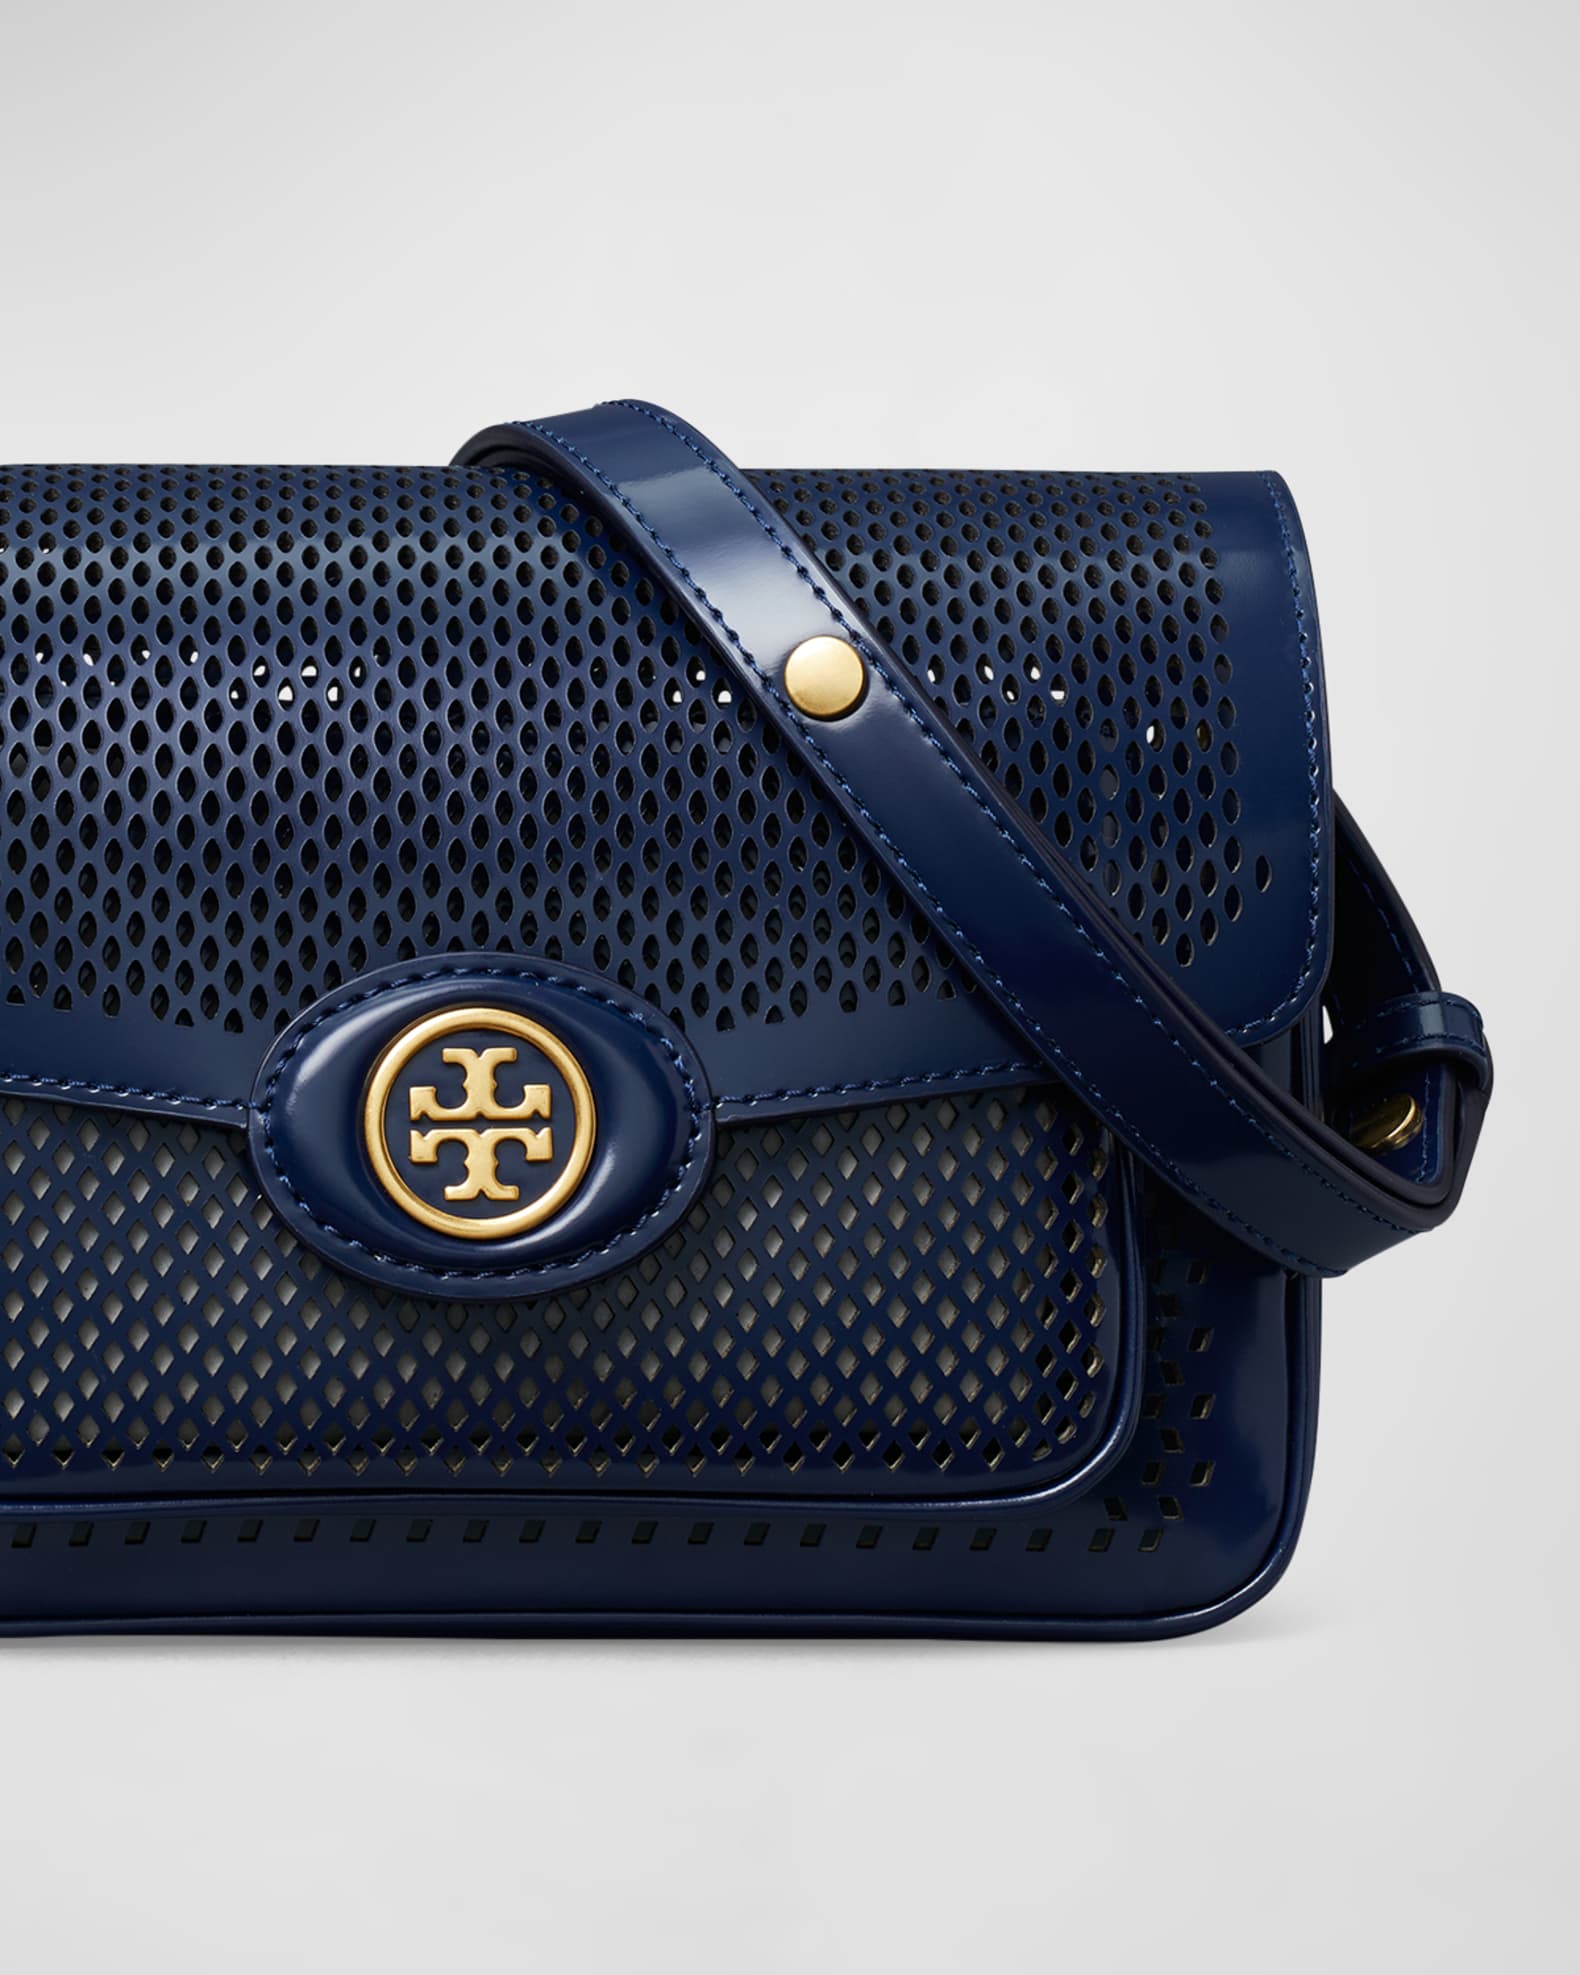 Tory Burch, Bags, Tory Burch Robinson Perforated Small Domed Satchel